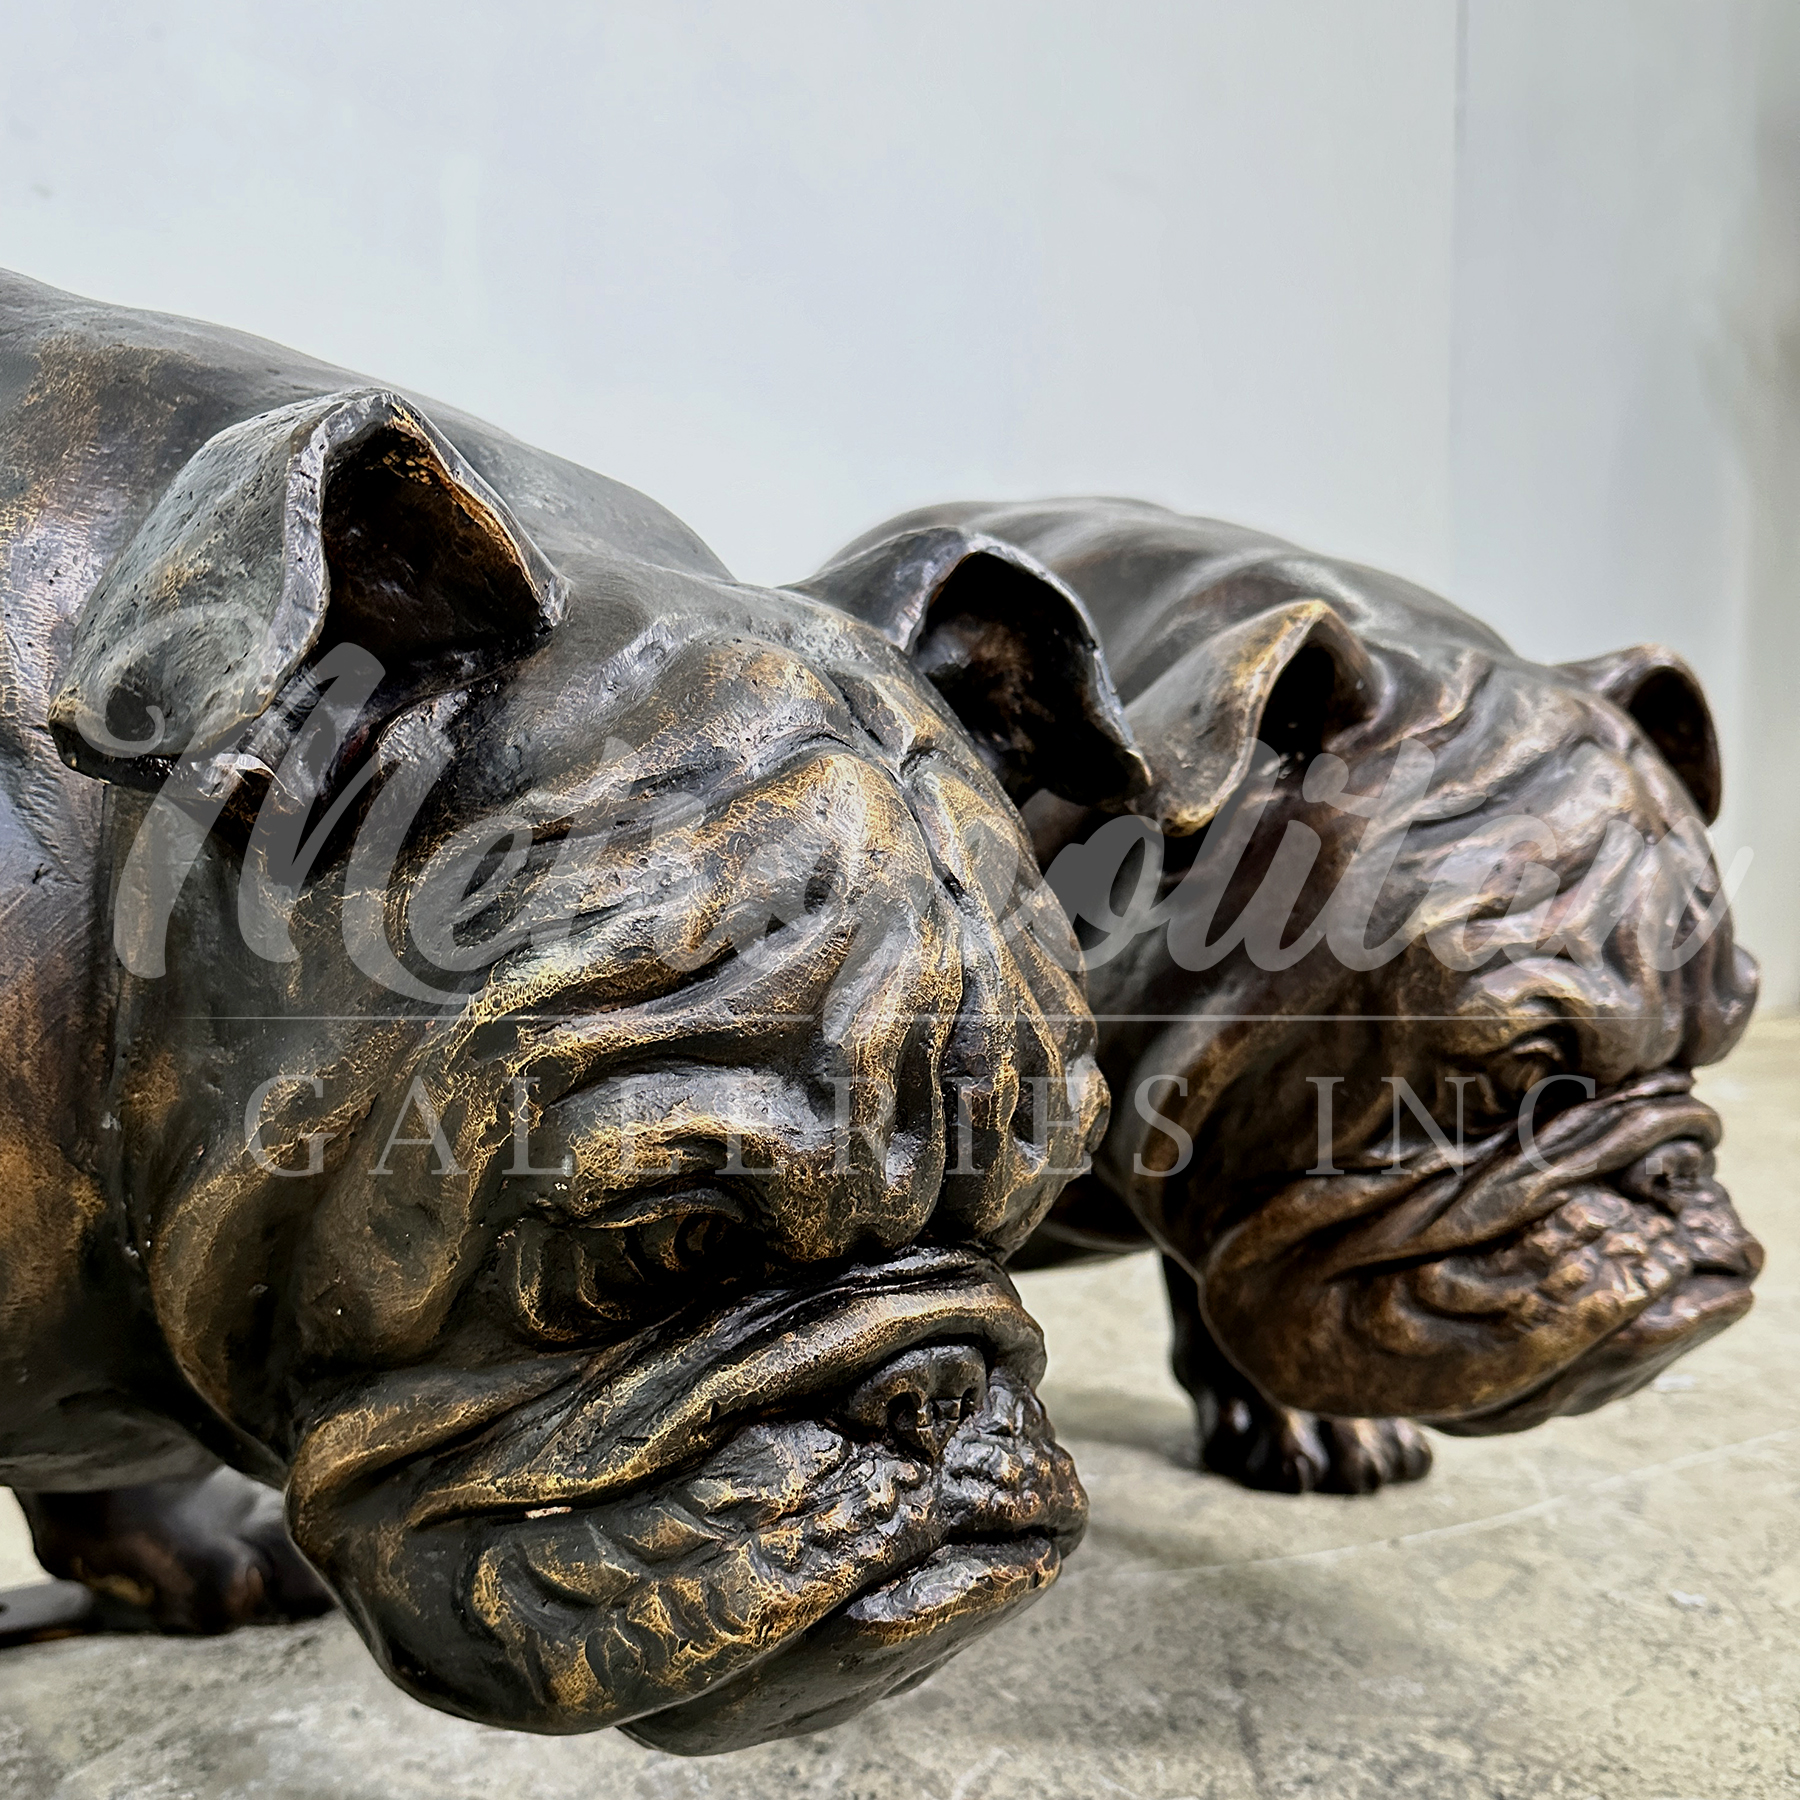 SRB10136 Bronze Left & Right Bulldog Looking Down Sculpture Set exclusively designed and produced by Metropolitan Galleries Inc.